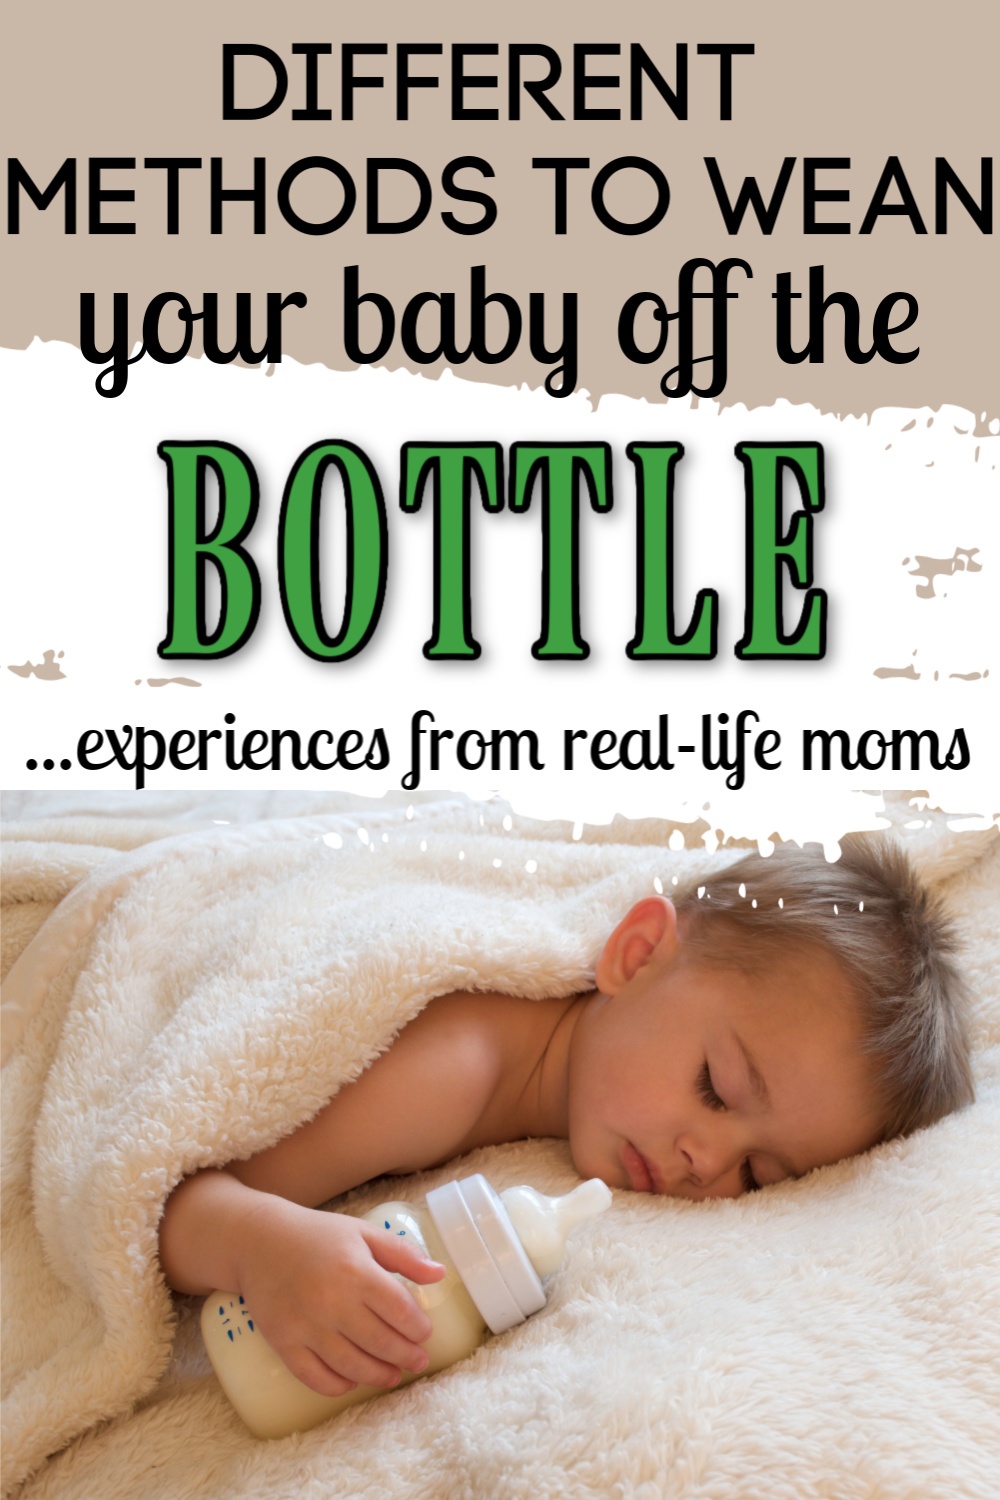 weaning your child off the bottle